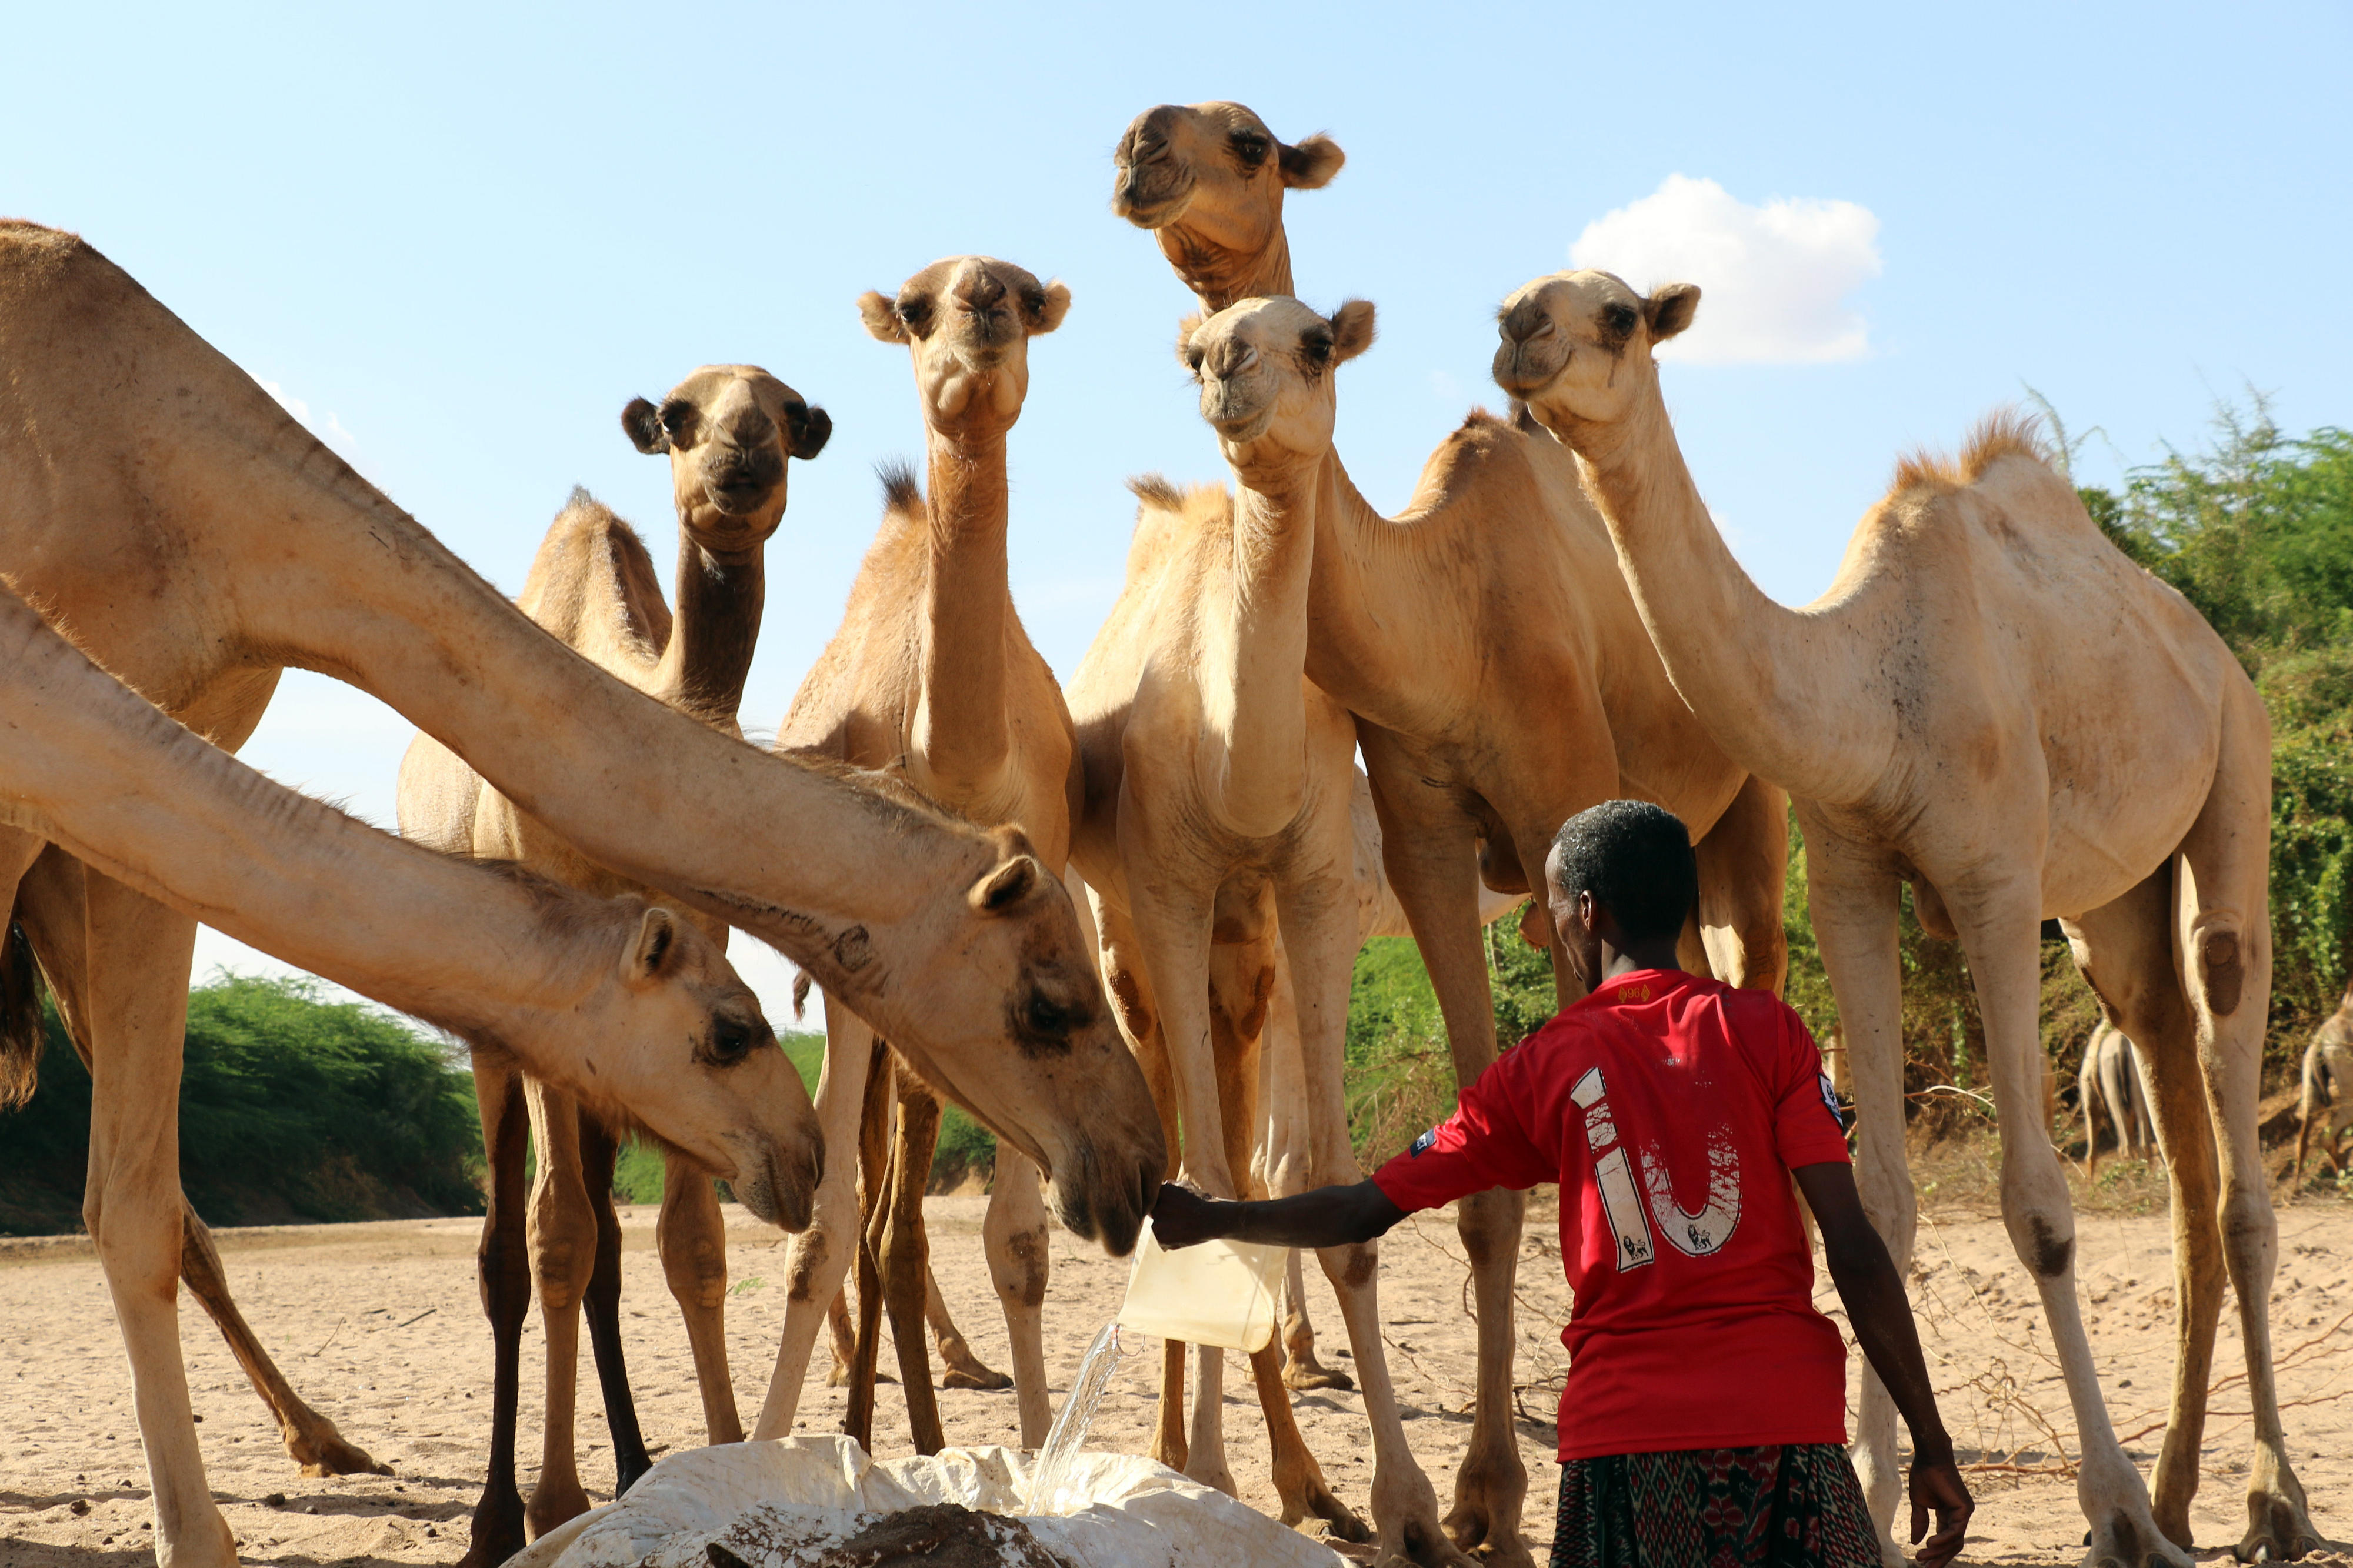 A farmer in Somalia with his camels